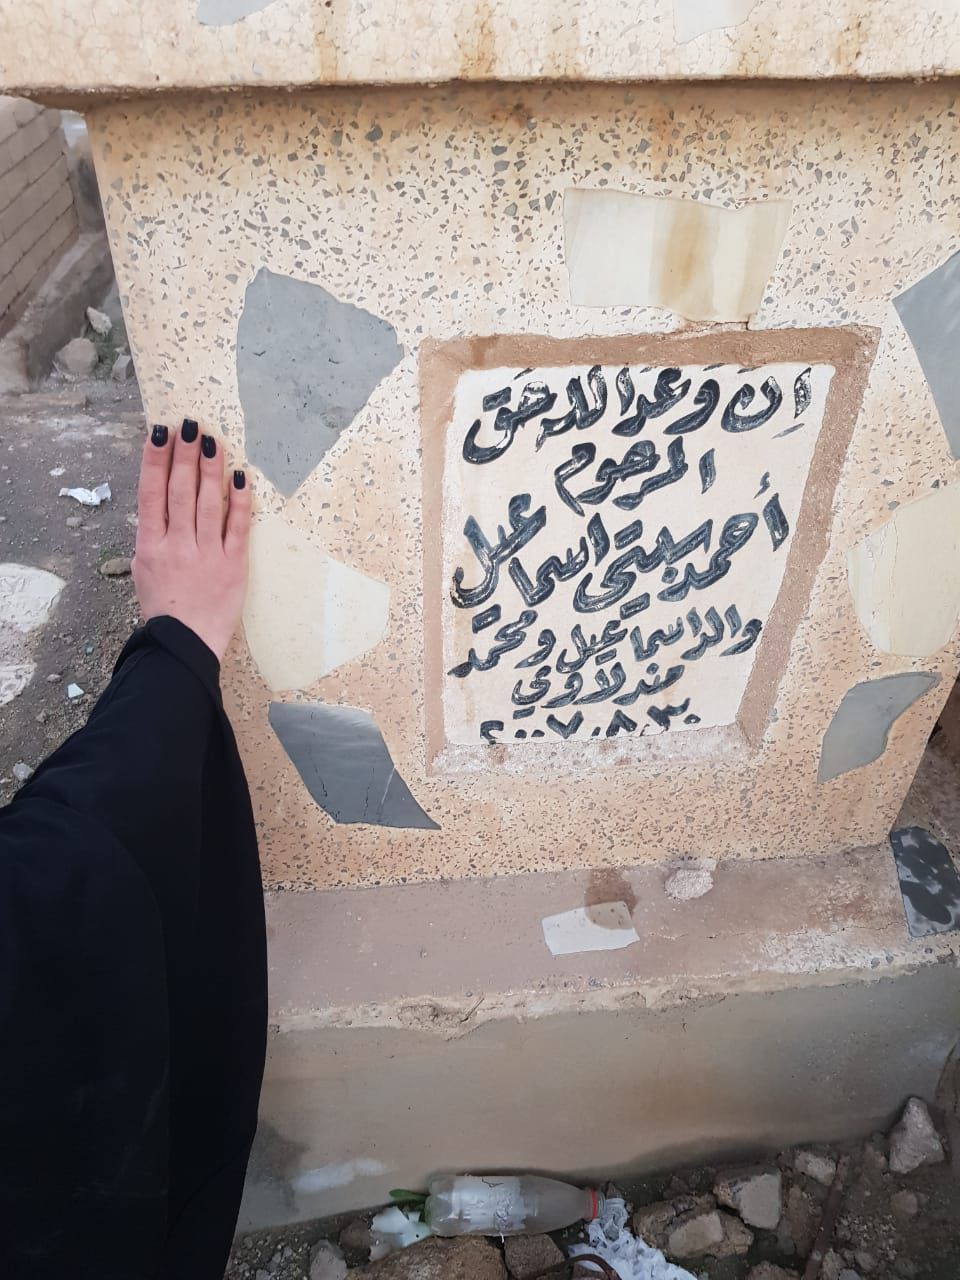 Zahra Ahmad places her hand over her grandfathers grave in Wadi-us-Salaam, the world's largest grave, in Najaf, Iraq.